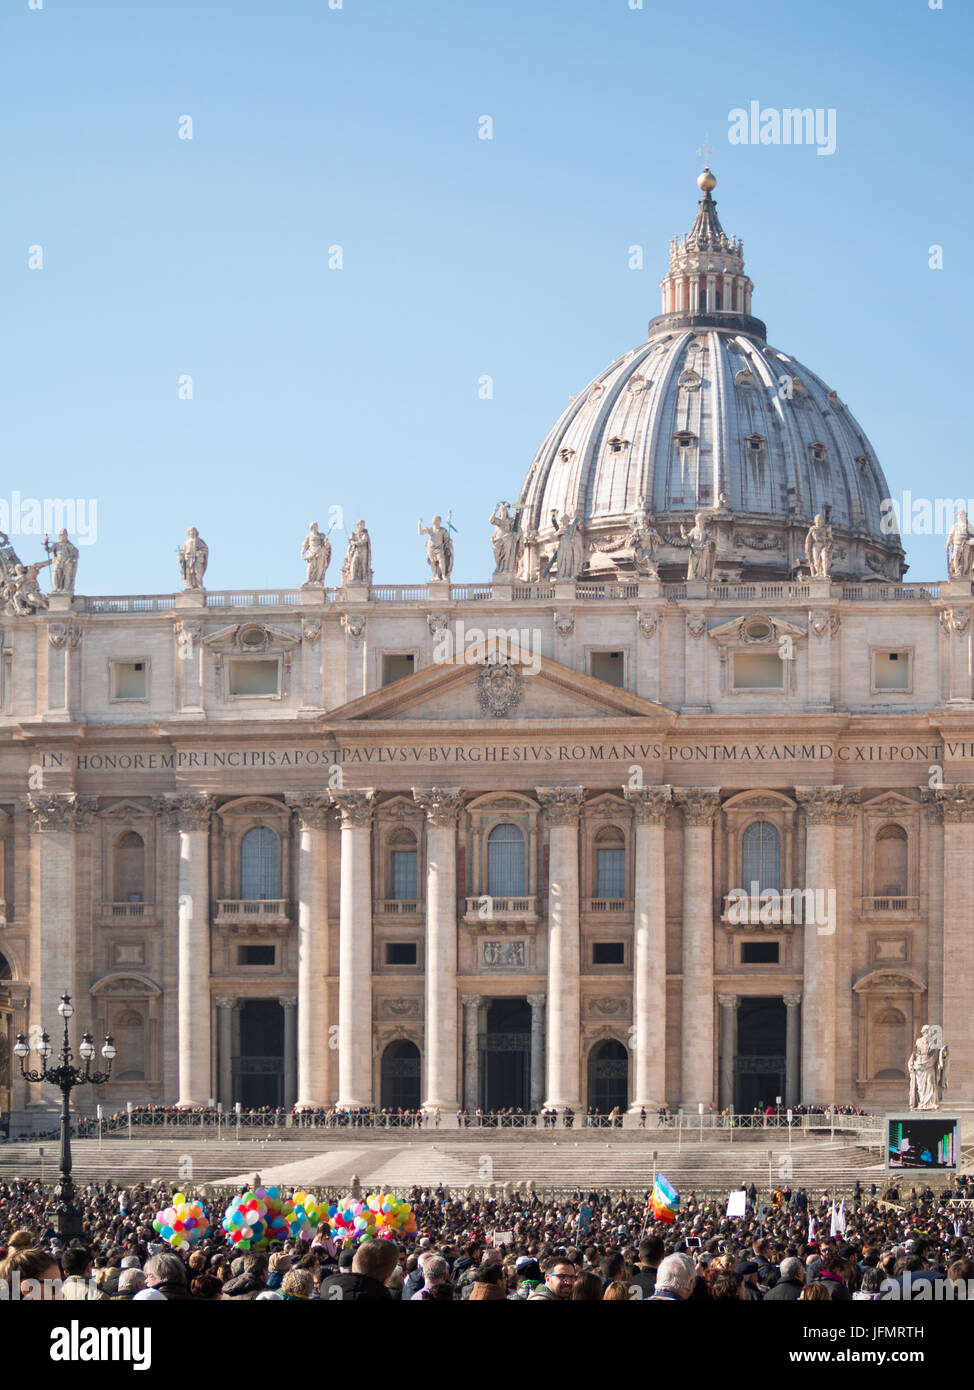 The crown in St. Peter's Square with the Basilica in background Stock Photo